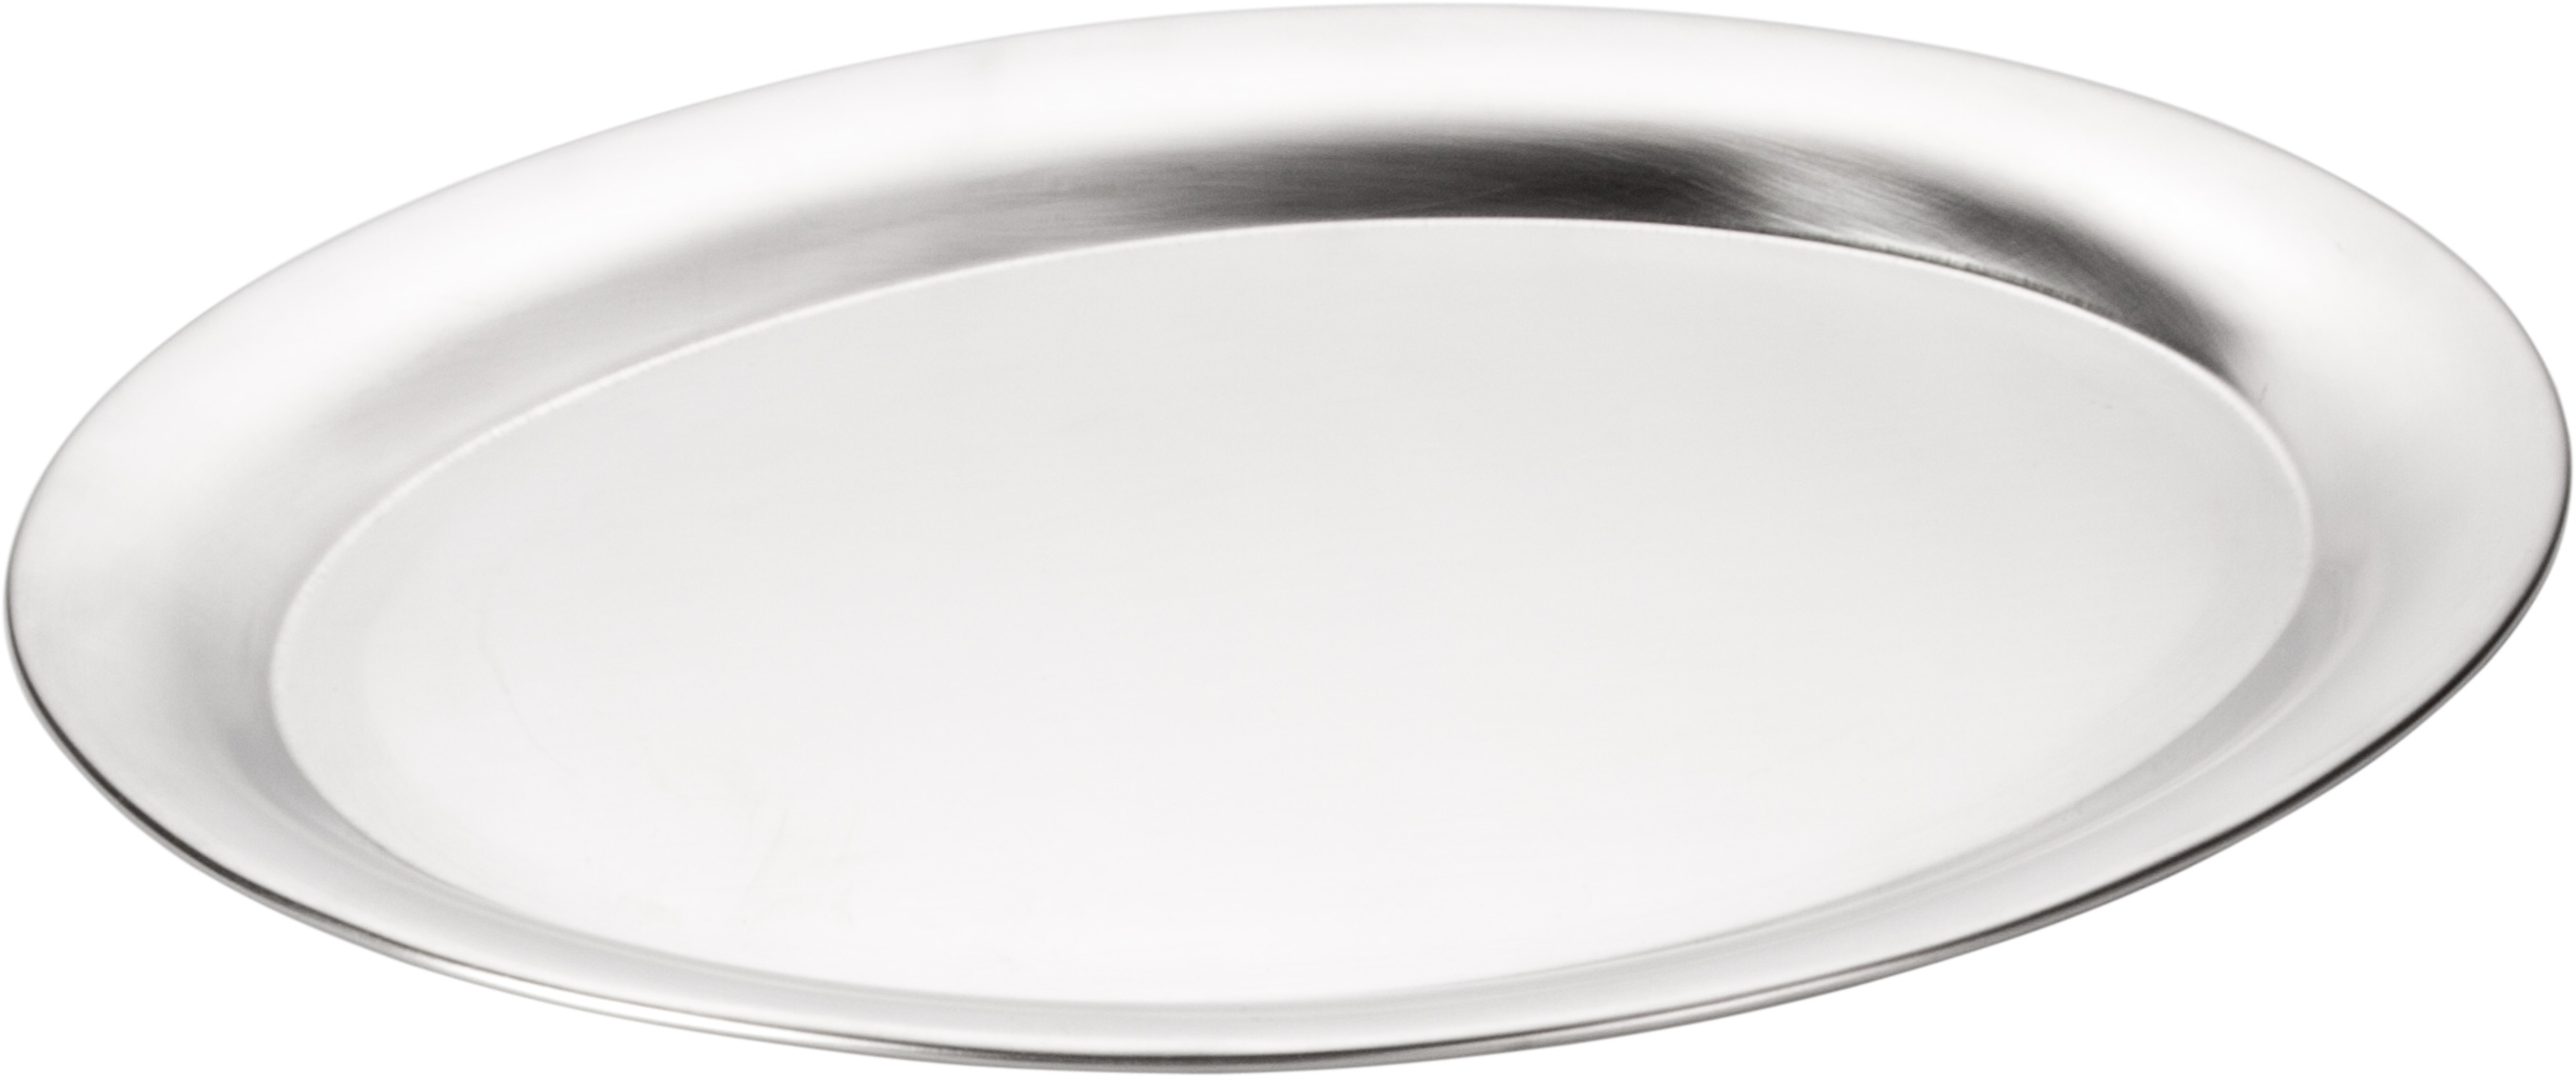 Serving tray oval, stainless steel mat - 23x17cm